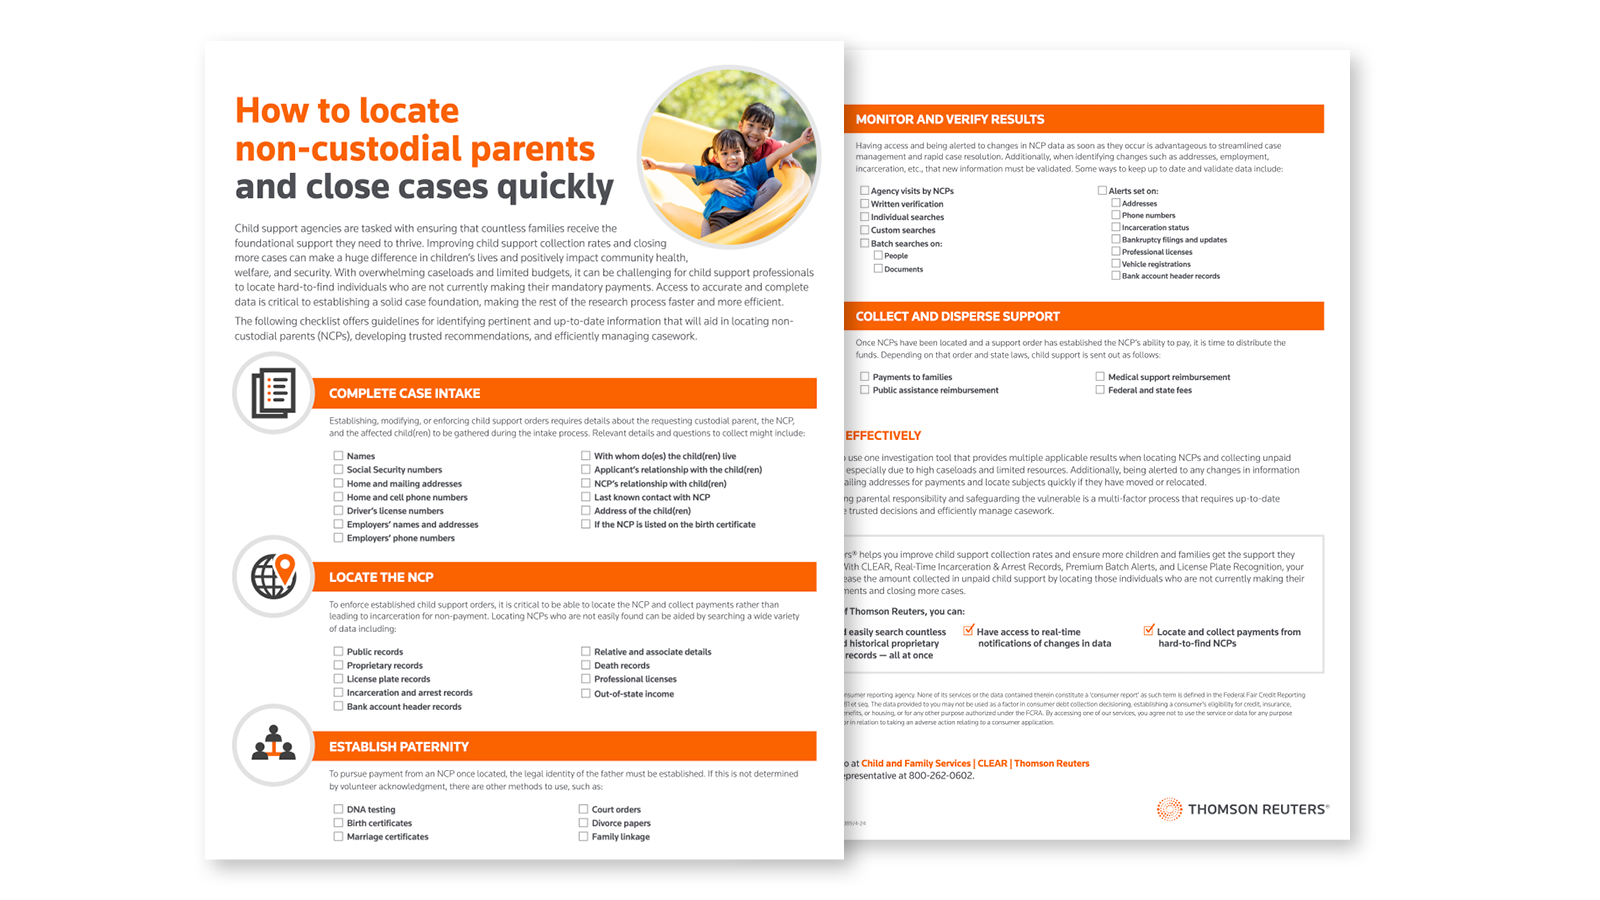 How to locate non-custodial parents and close cases quickly PDF thumbnail.